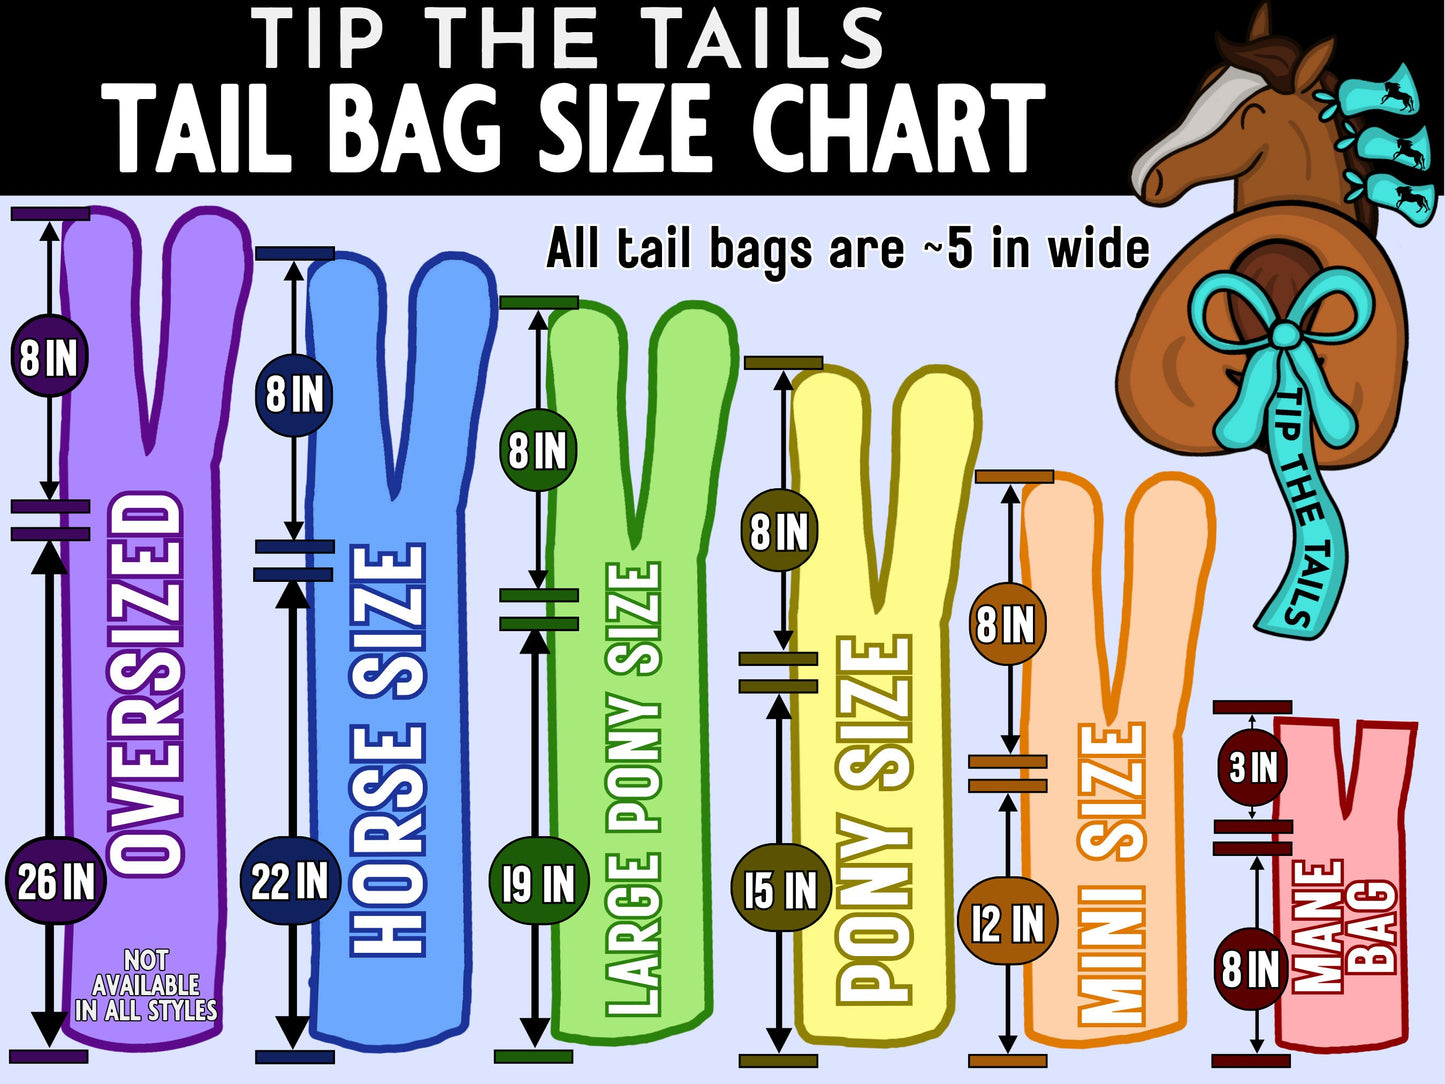 Dressage Training Pyramid Equine Tail Bag-Tip The Tails